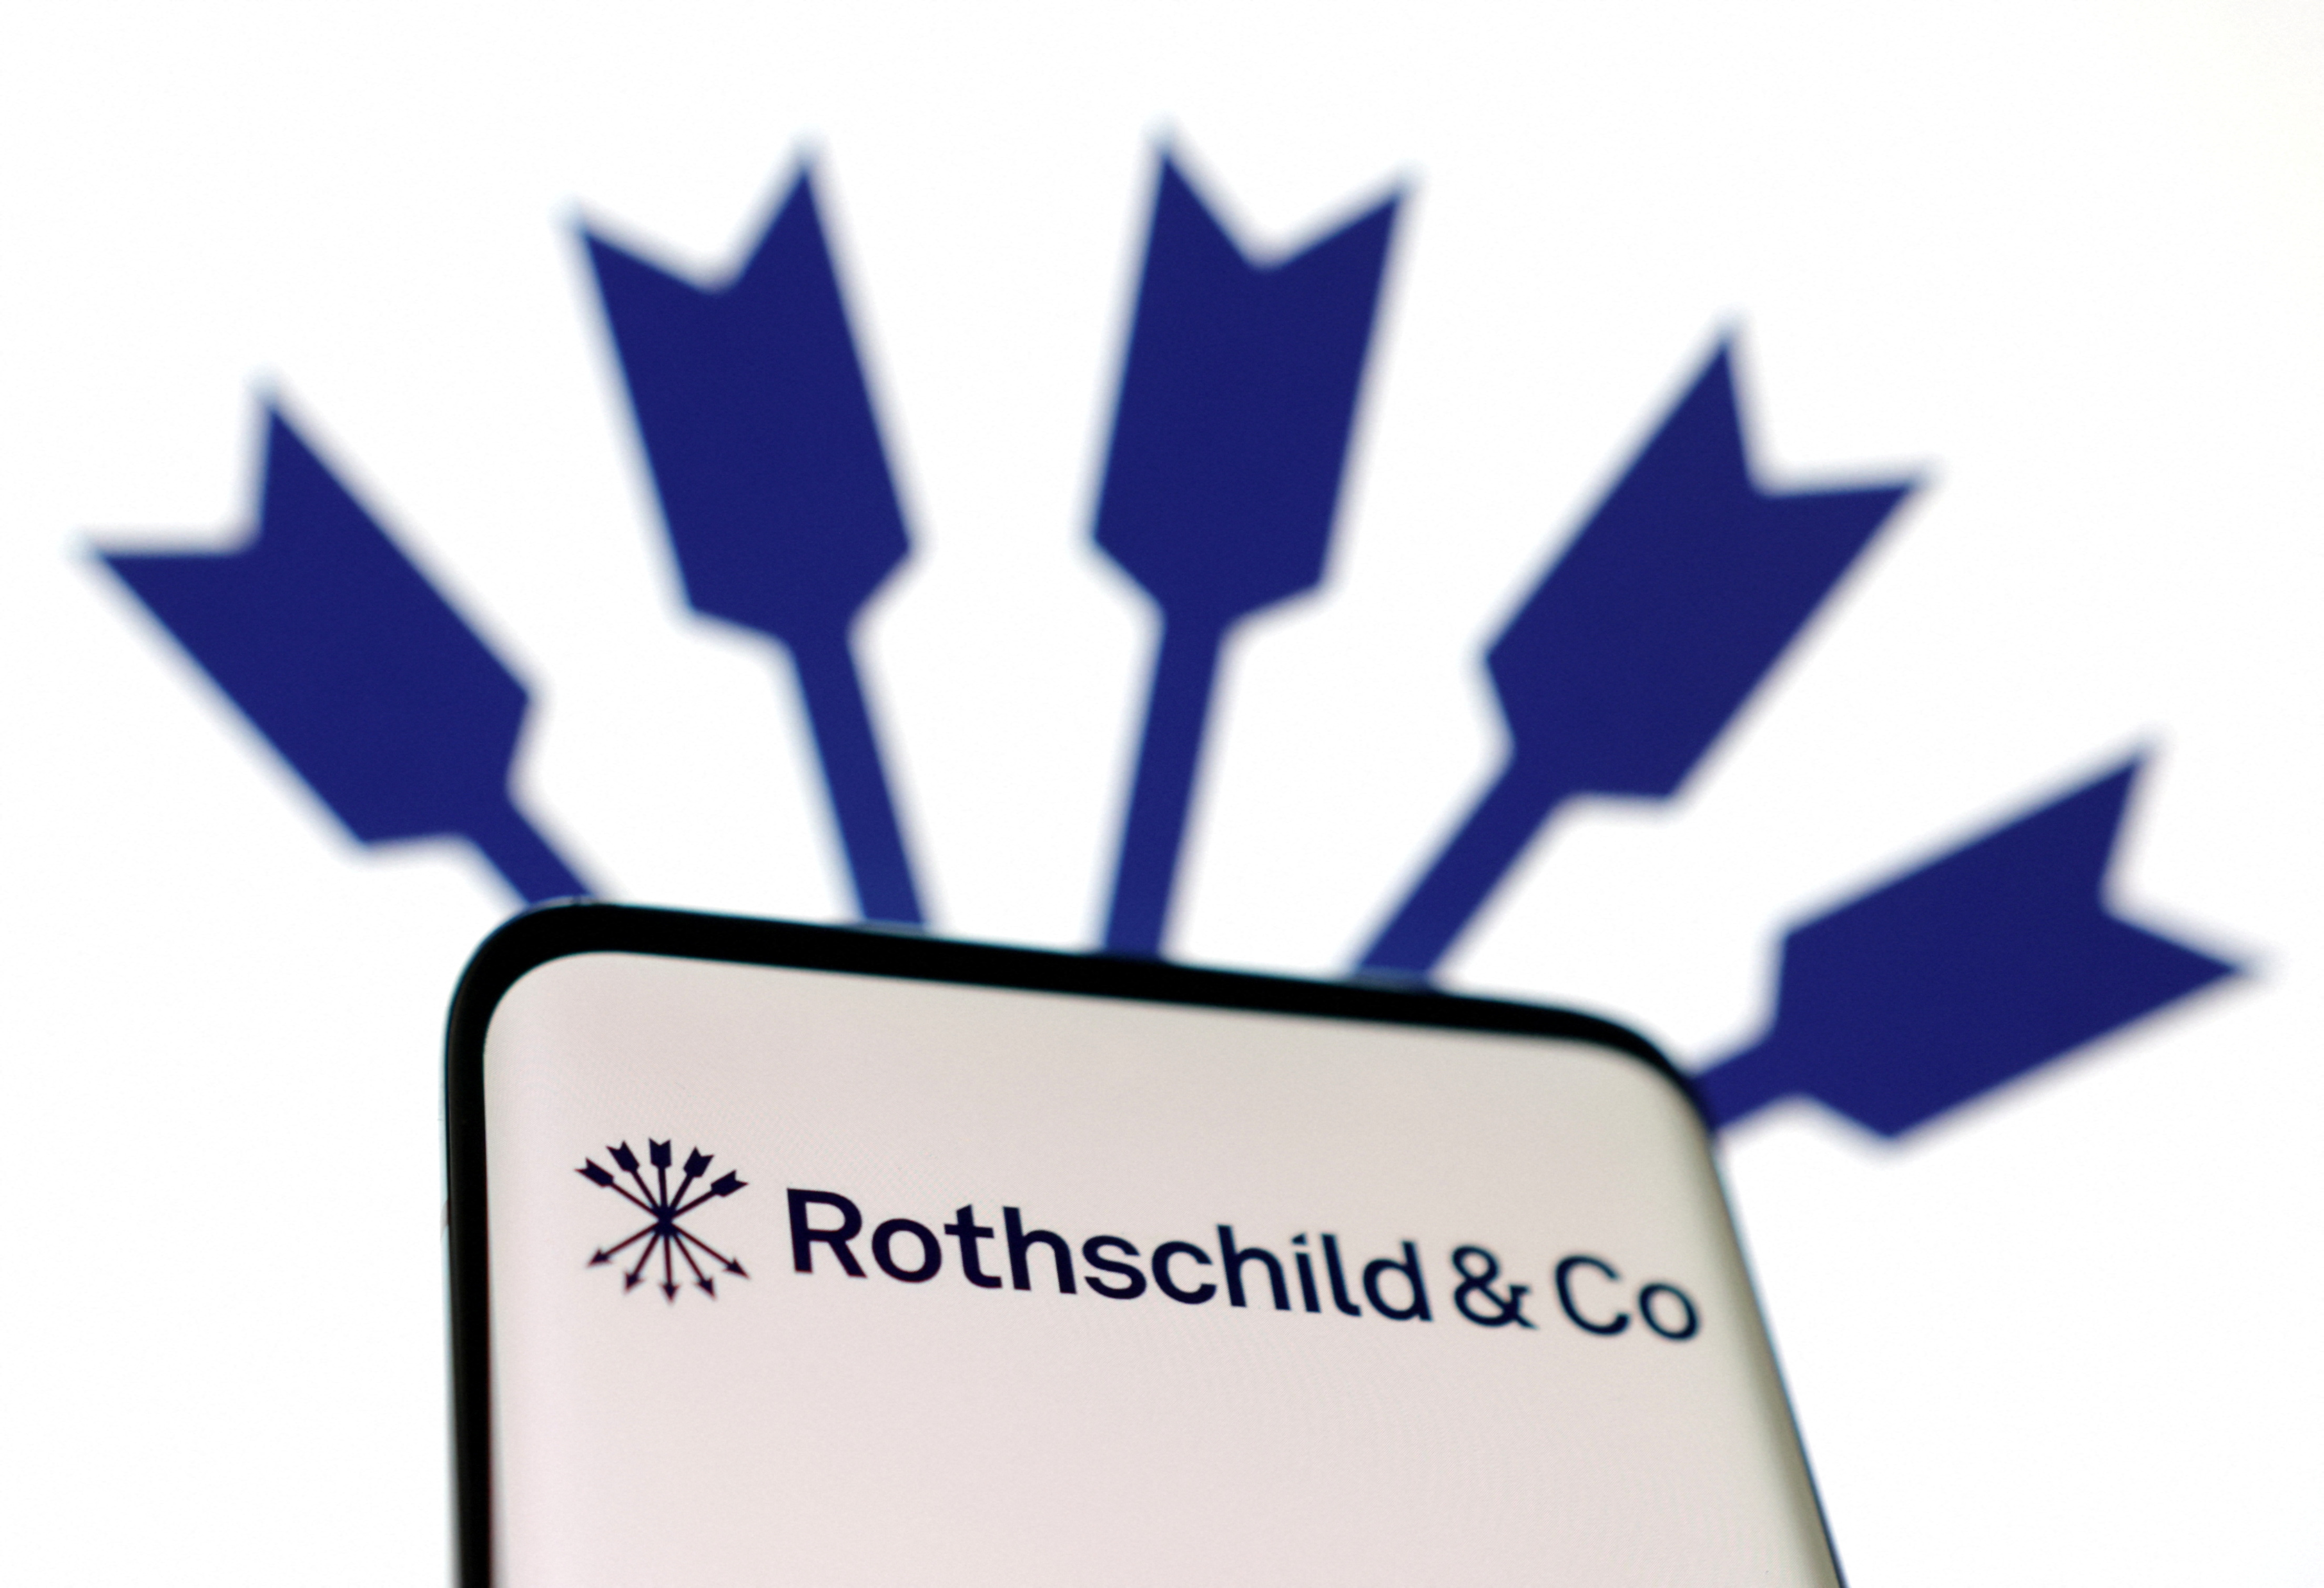 Rothschild & Co's first-half sales fall 10% amid weak M&A activity ...